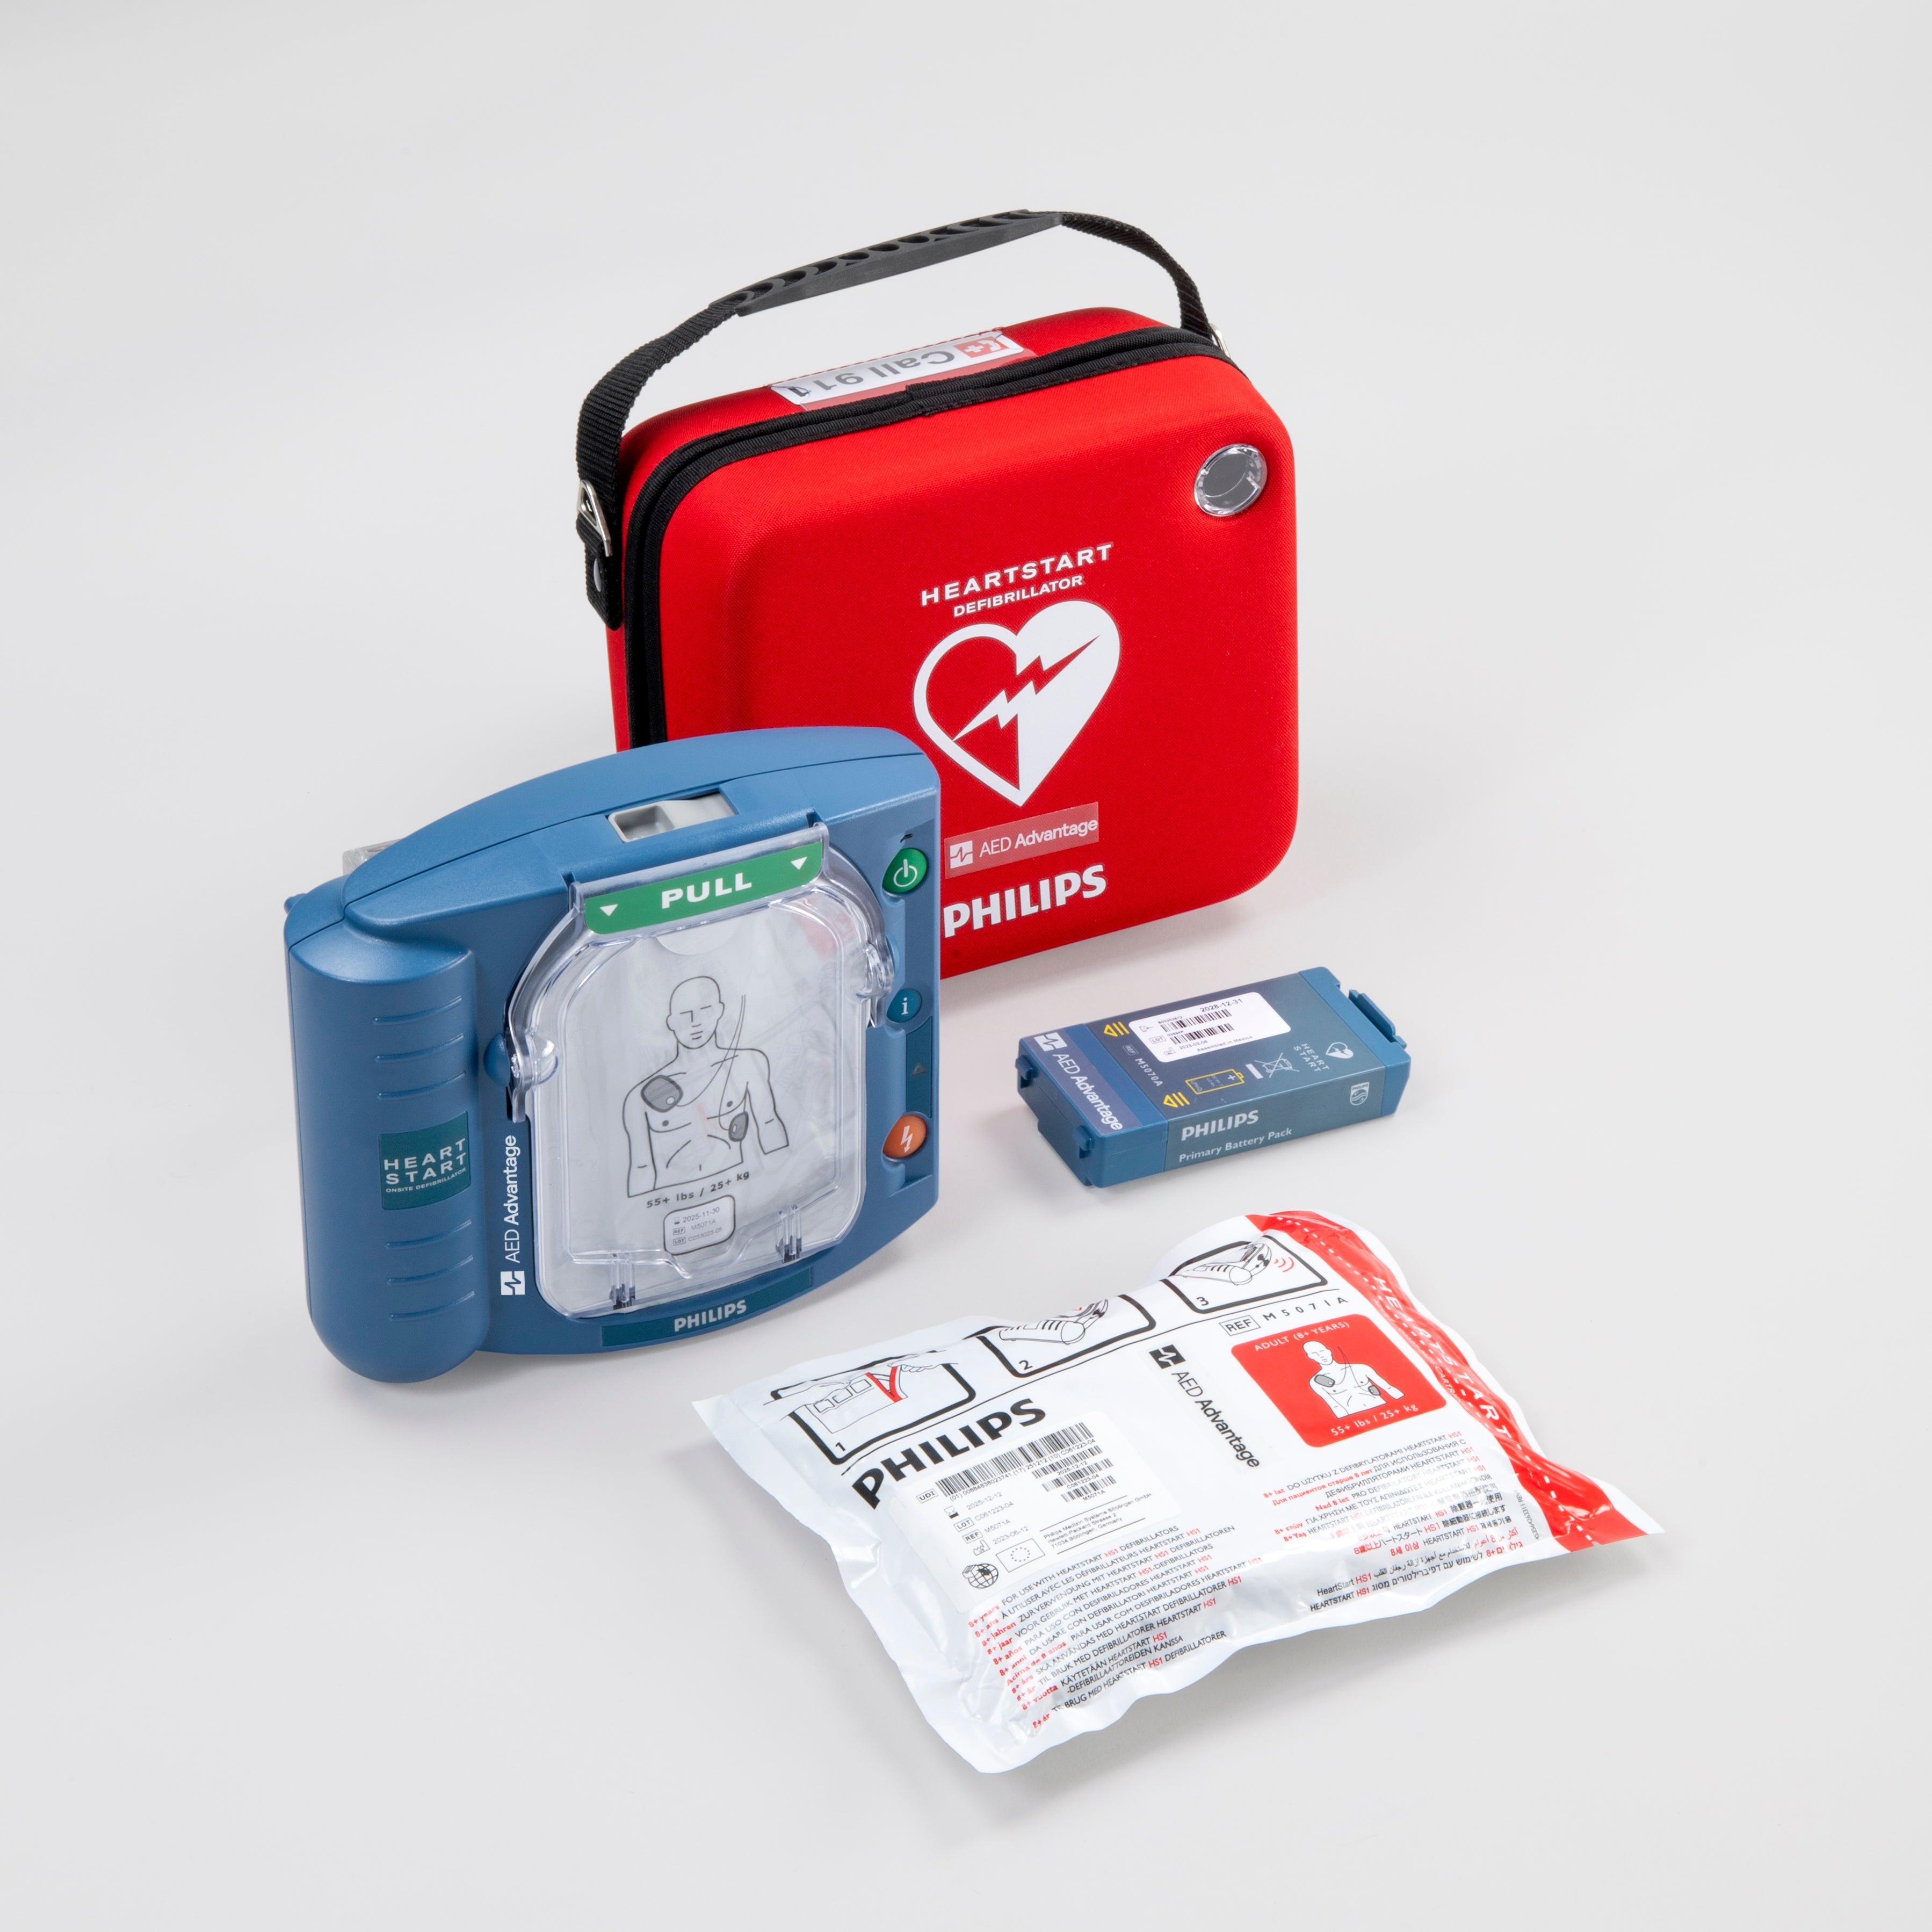 Philips OnSite, What is Included in an AED Purchase?